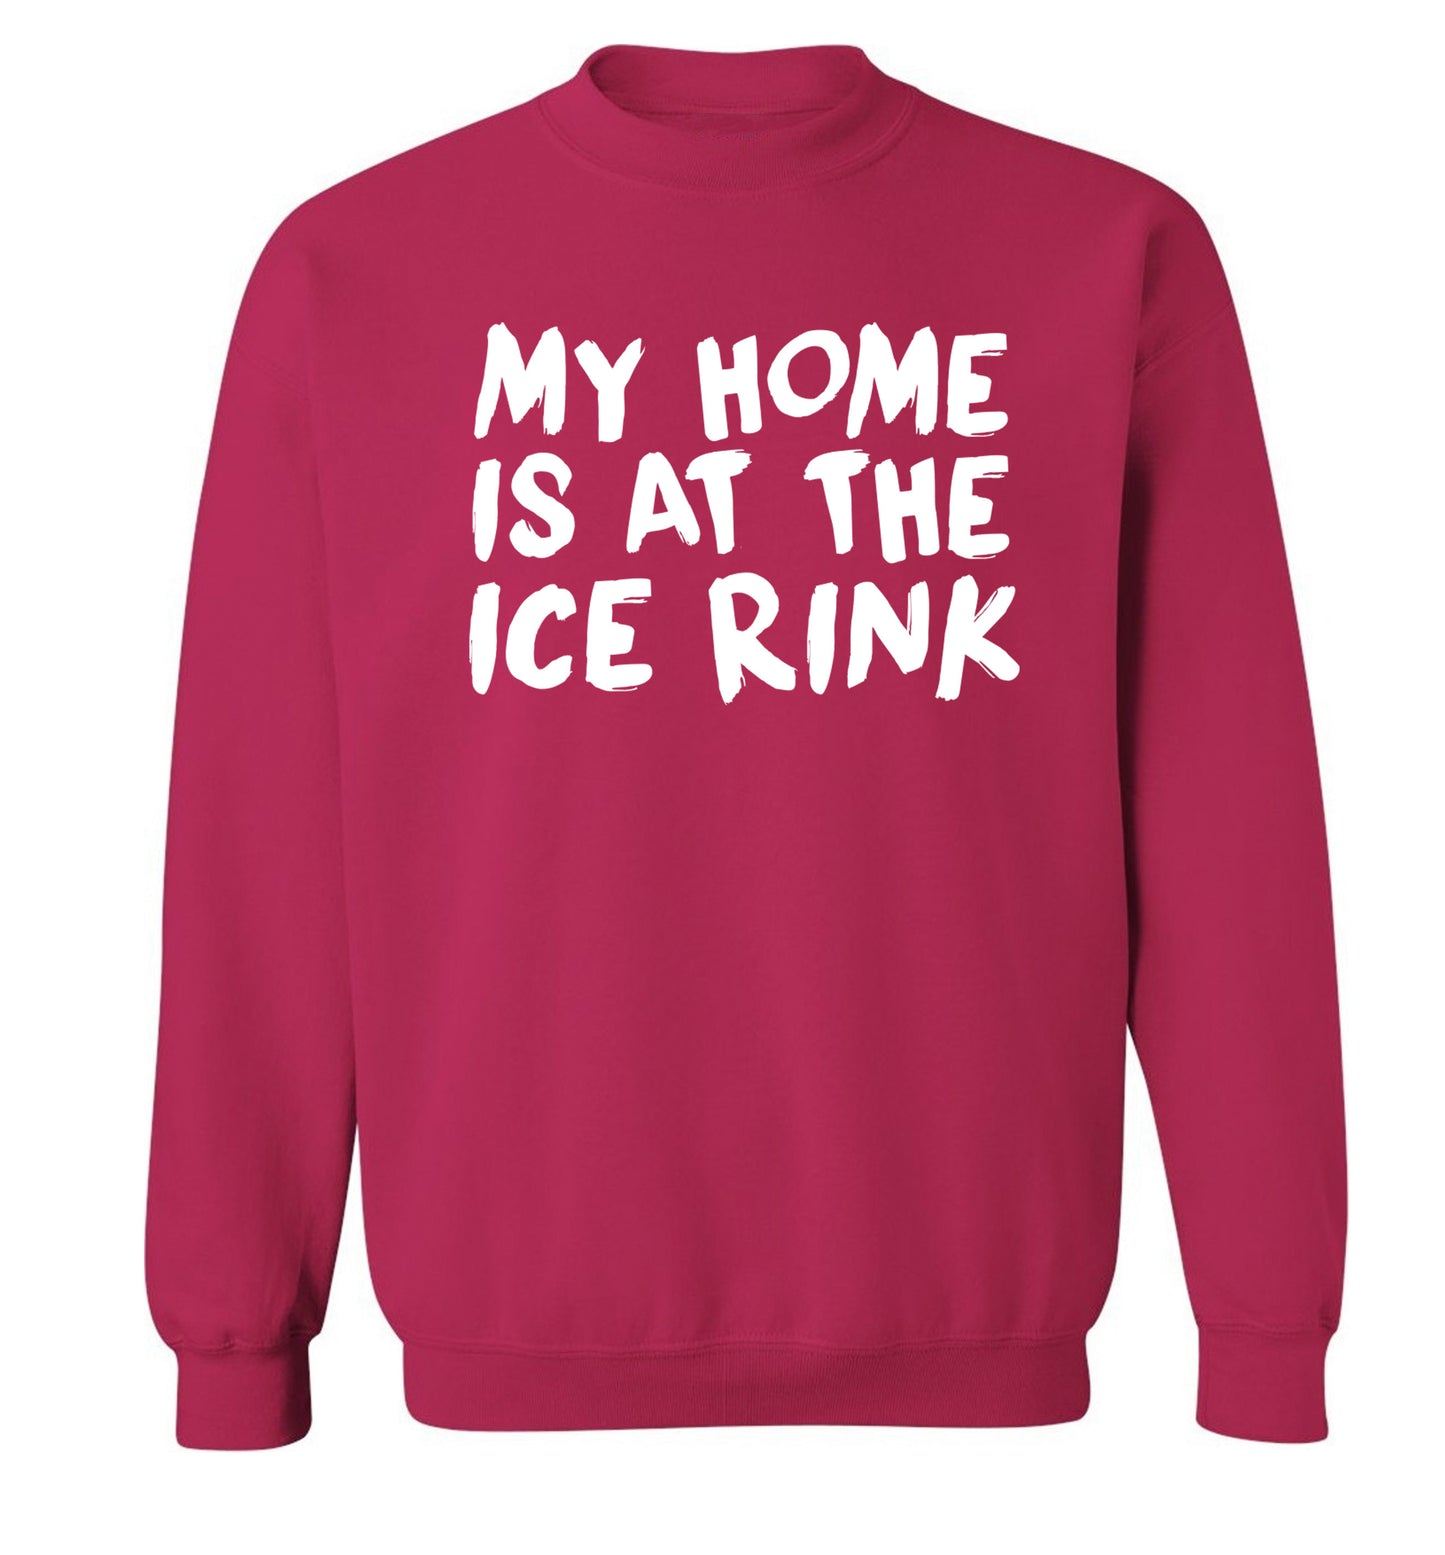 My home is at the ice rink Adult's unisex pink Sweater 2XL